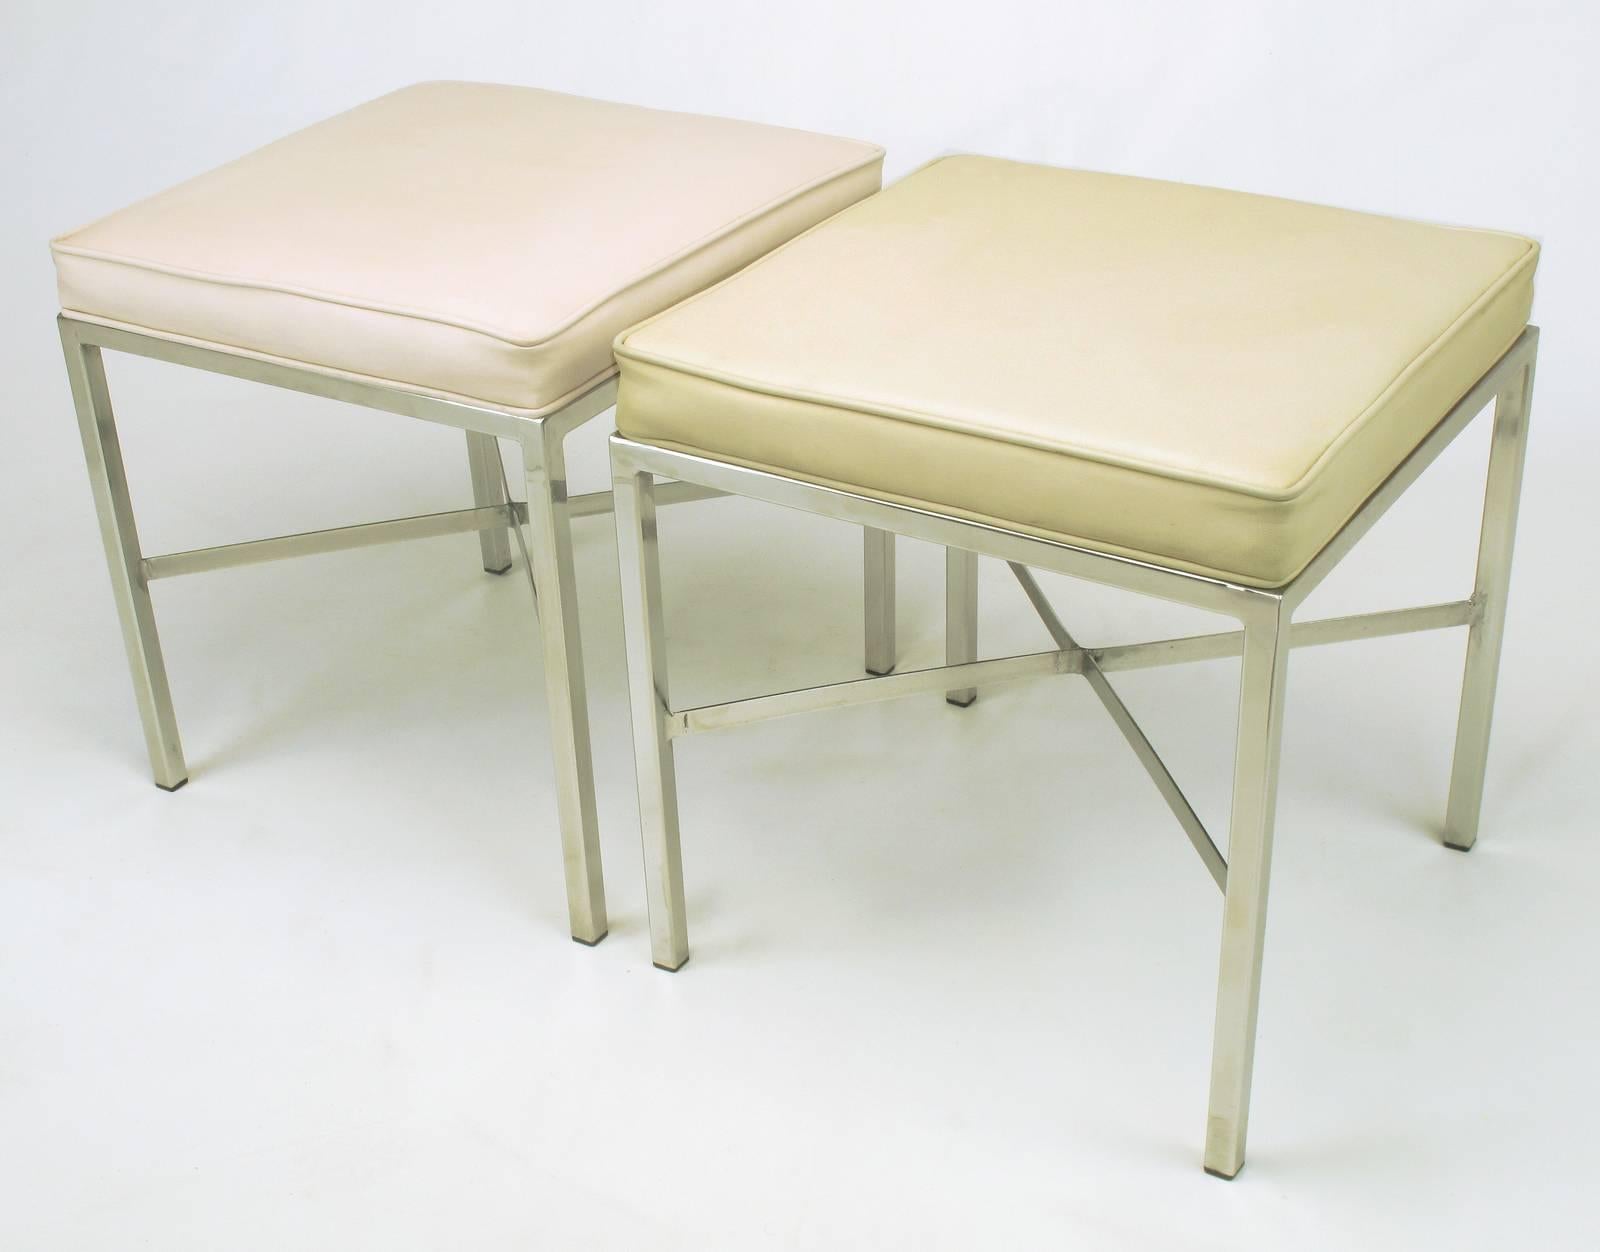 Pair of polished and flat steel X-stretcher ottomans or benches with complementary faux leather upholstery. One bench is covered in taupe and the other in a blush taupe. Welded X-stretchers are flat bar steel. Can be recovered COM for 100.00 per